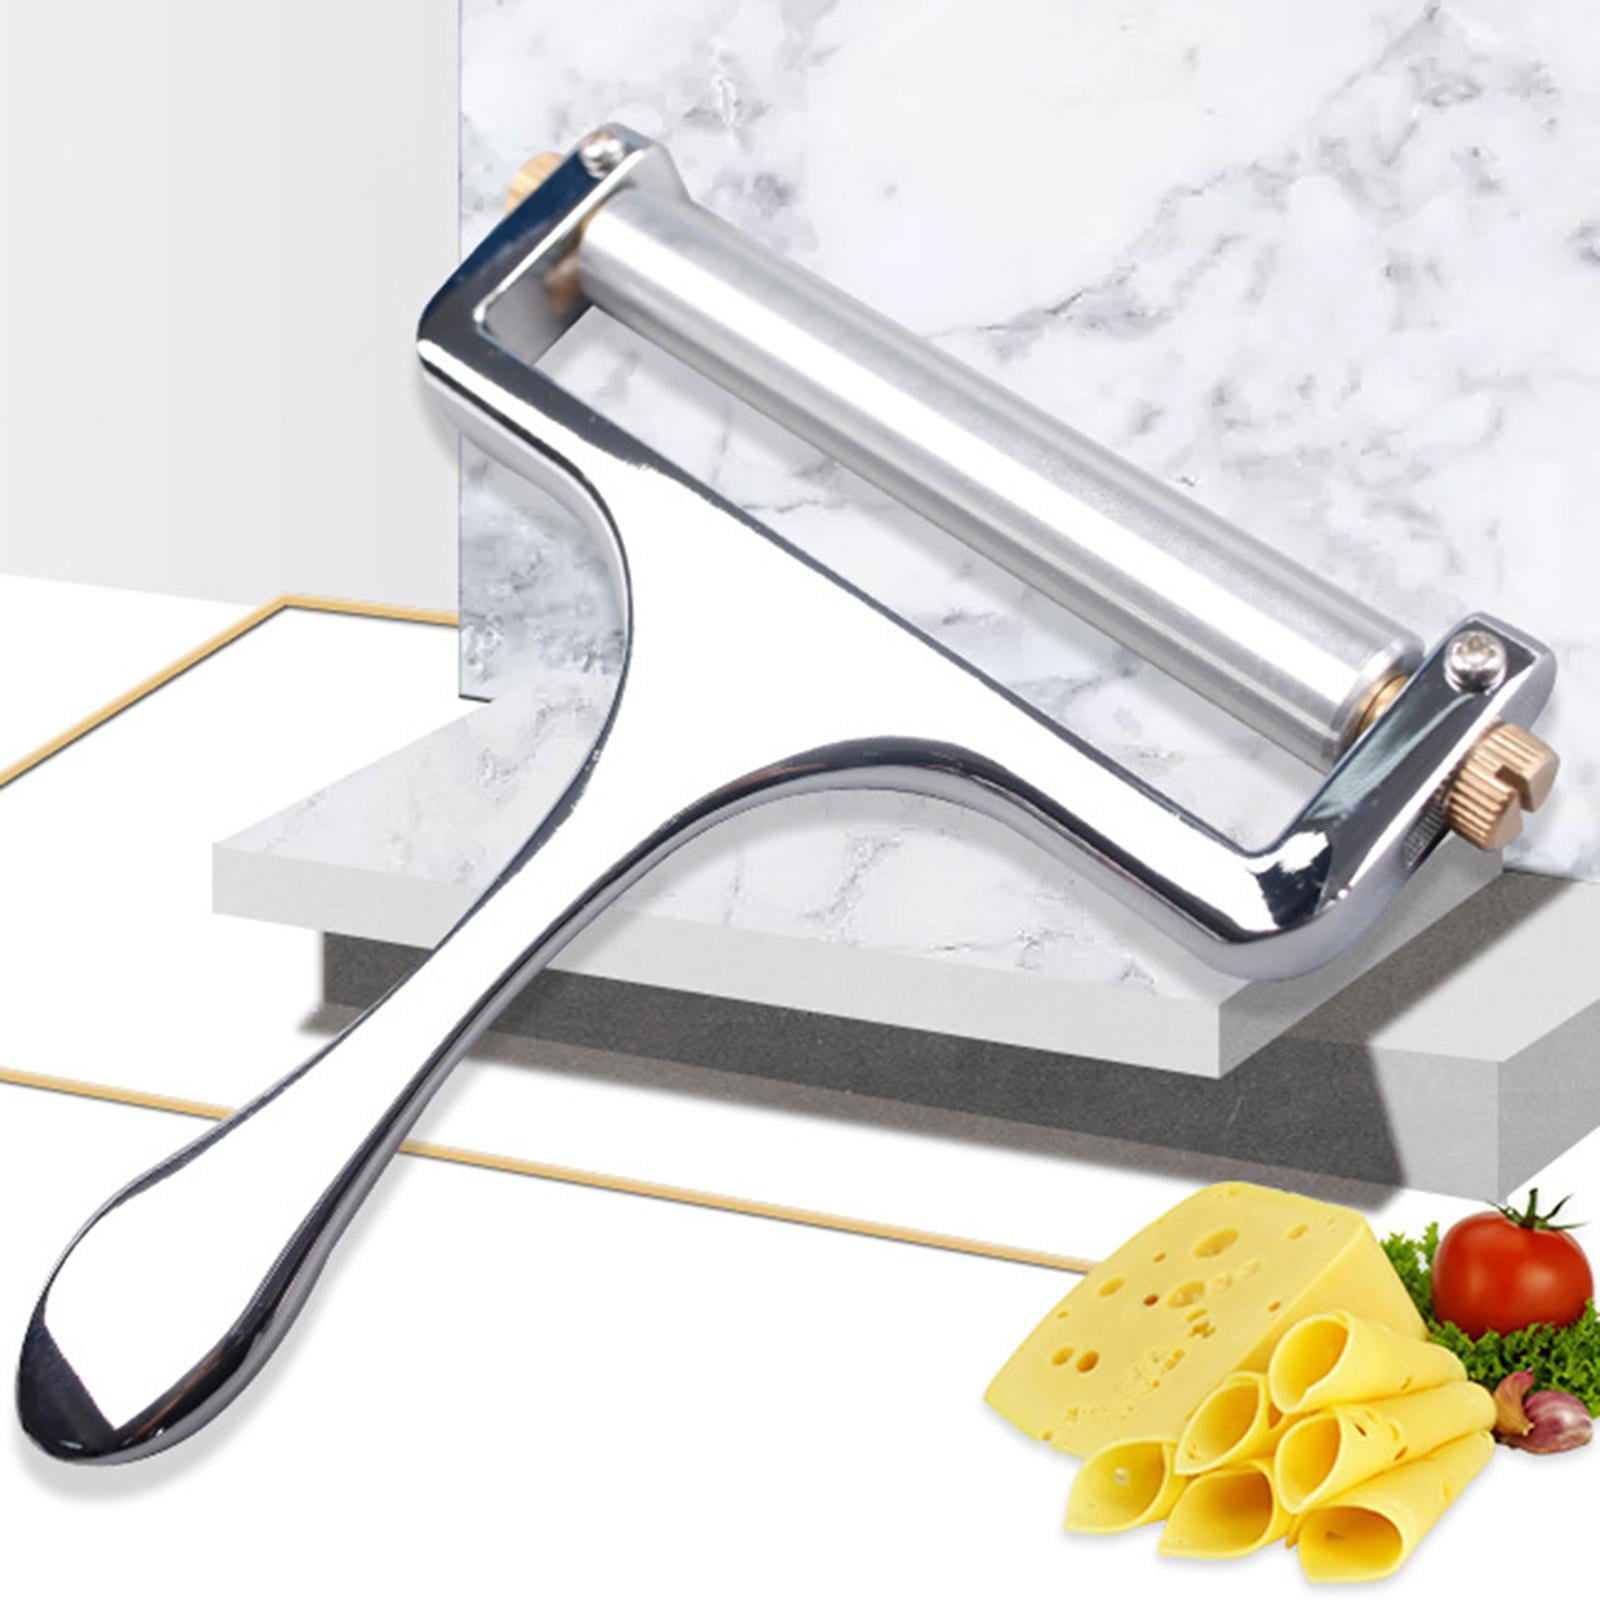 Protoiya Stainless Steel Cheese Slicer,Adjustable Cheese Shaver,for Cheddar, Gruyere, Raclette, Mozzarella Cheese Block,Thick and Thin Slicer, Cheese